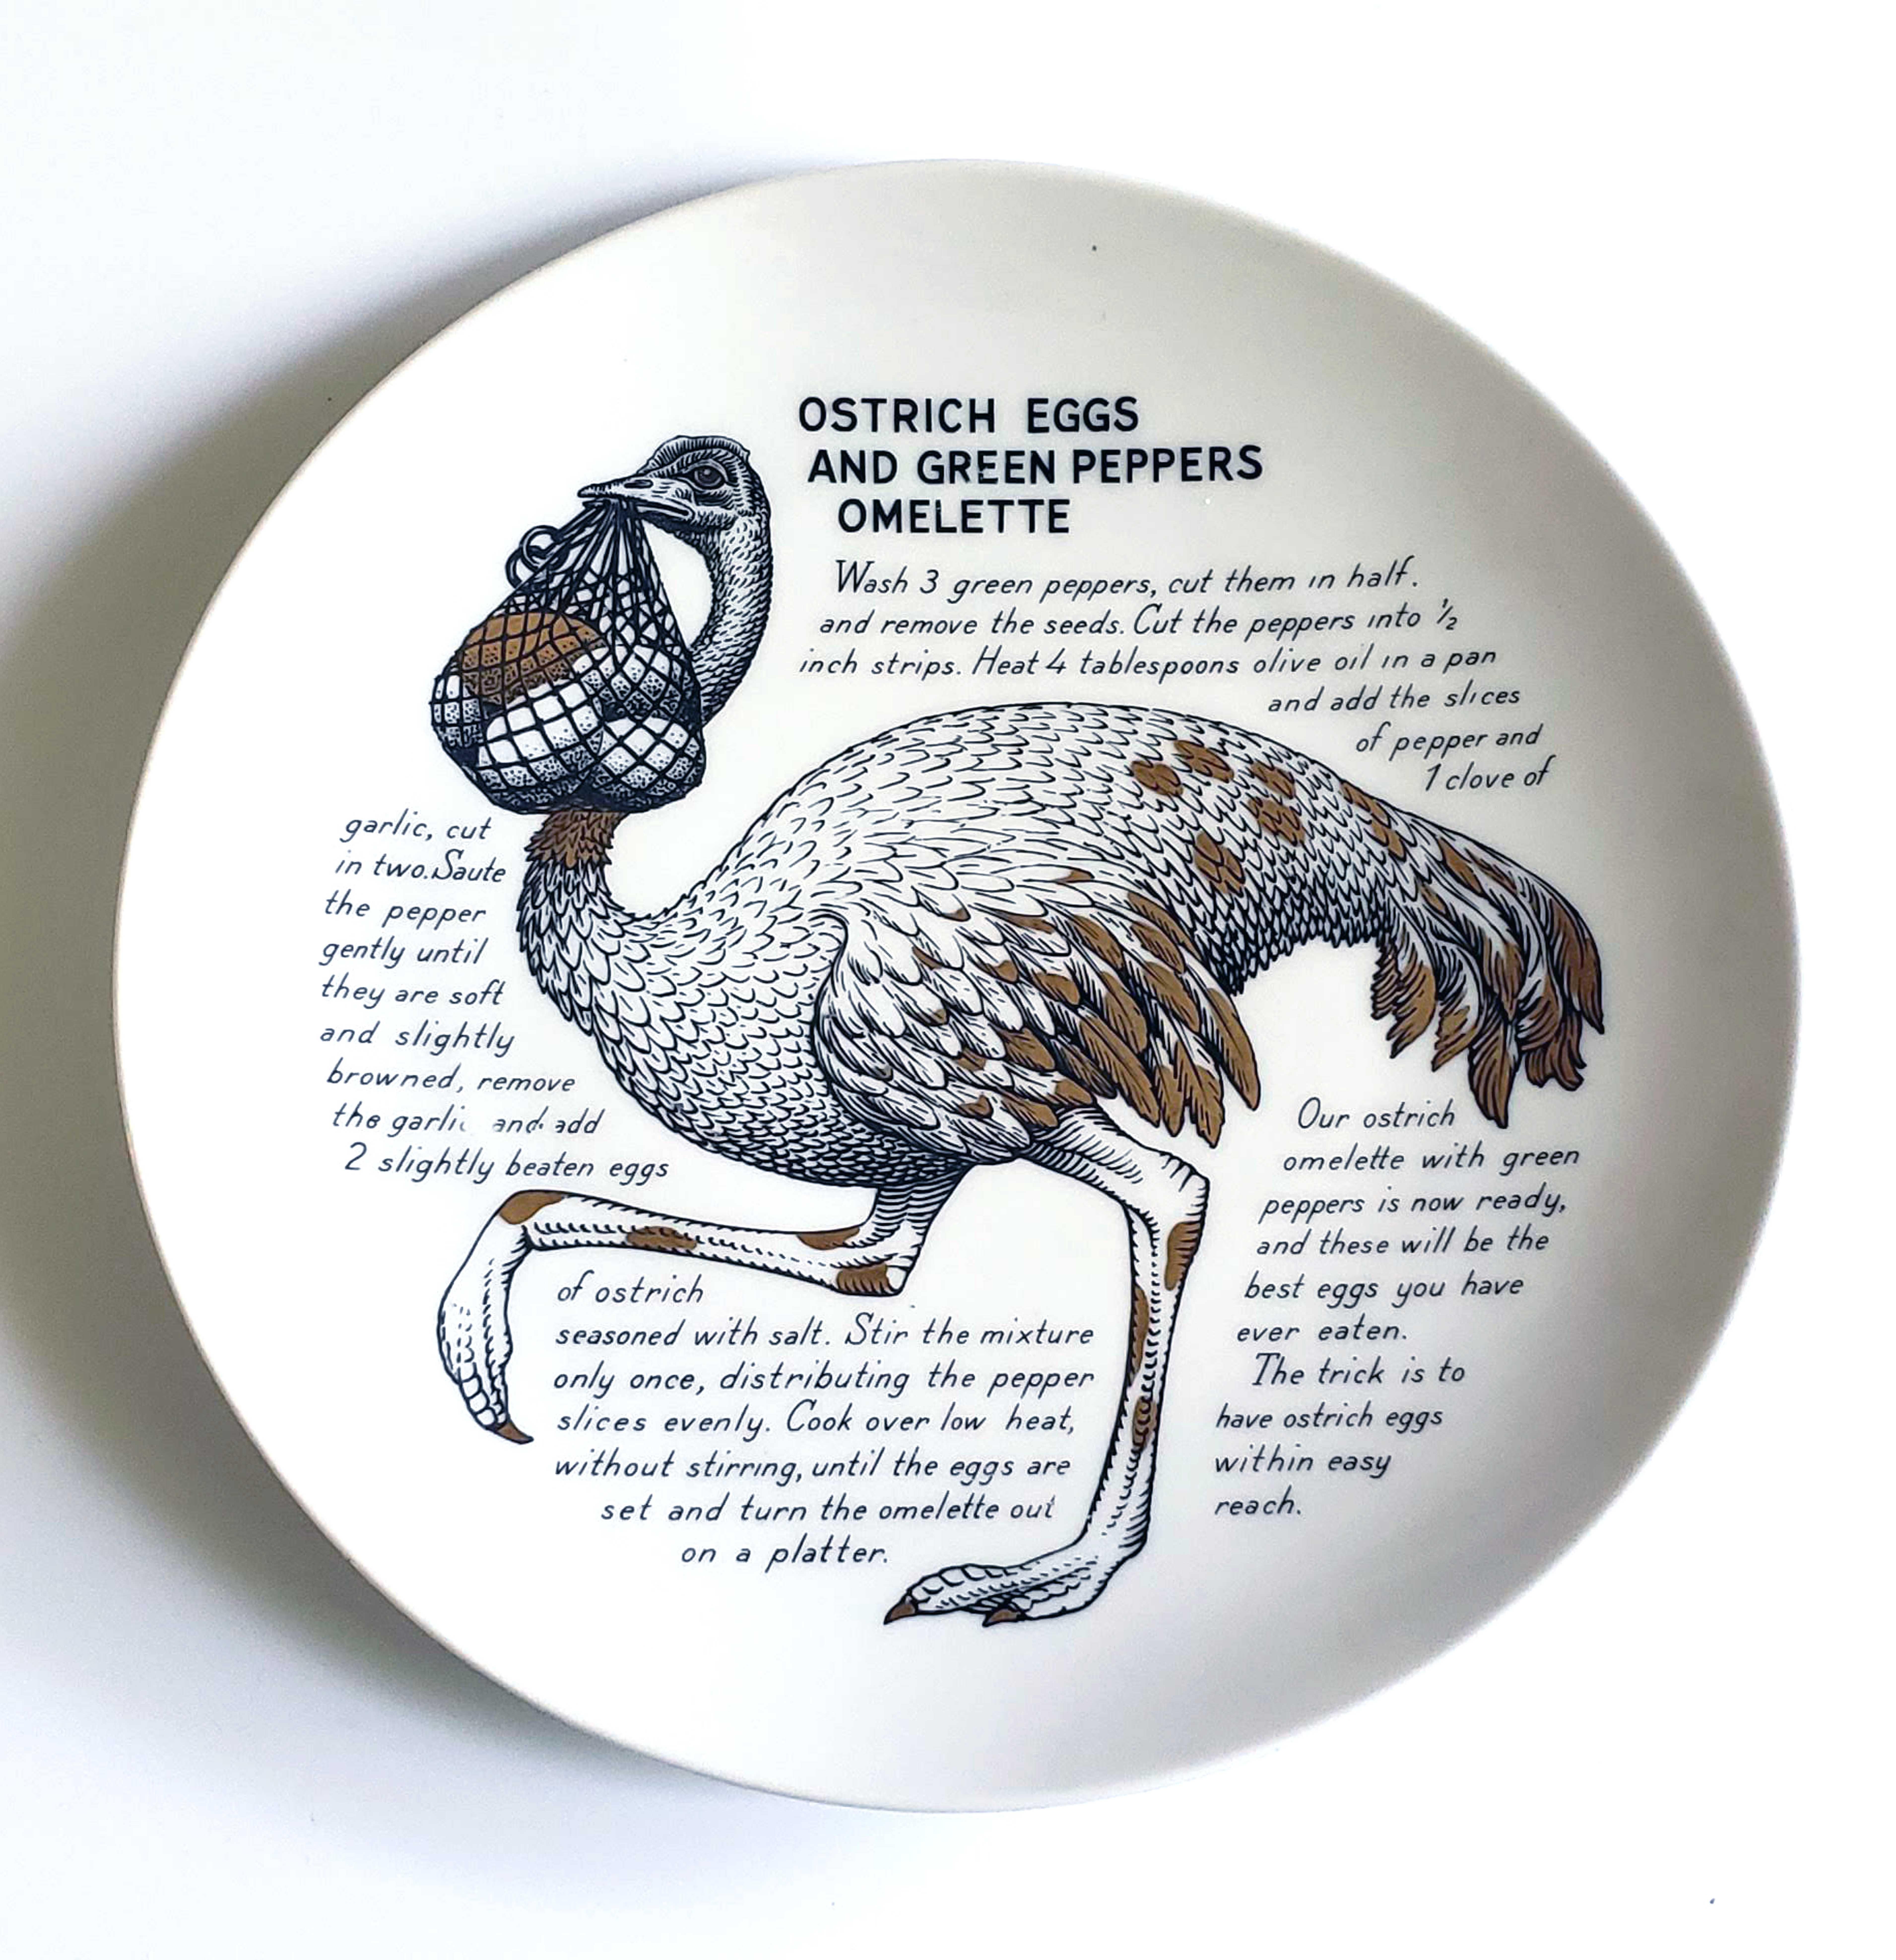 Piero Fornasetti Fleming Joffe porcelain Recipe plate,
Ostrich & Chicken Breasts,
1960s-1974.

This rare Piero Fornasetti porcelain plate is from a series of fourteen made for the Fleming Joffe company in New York City.

 The Fleming Joffe